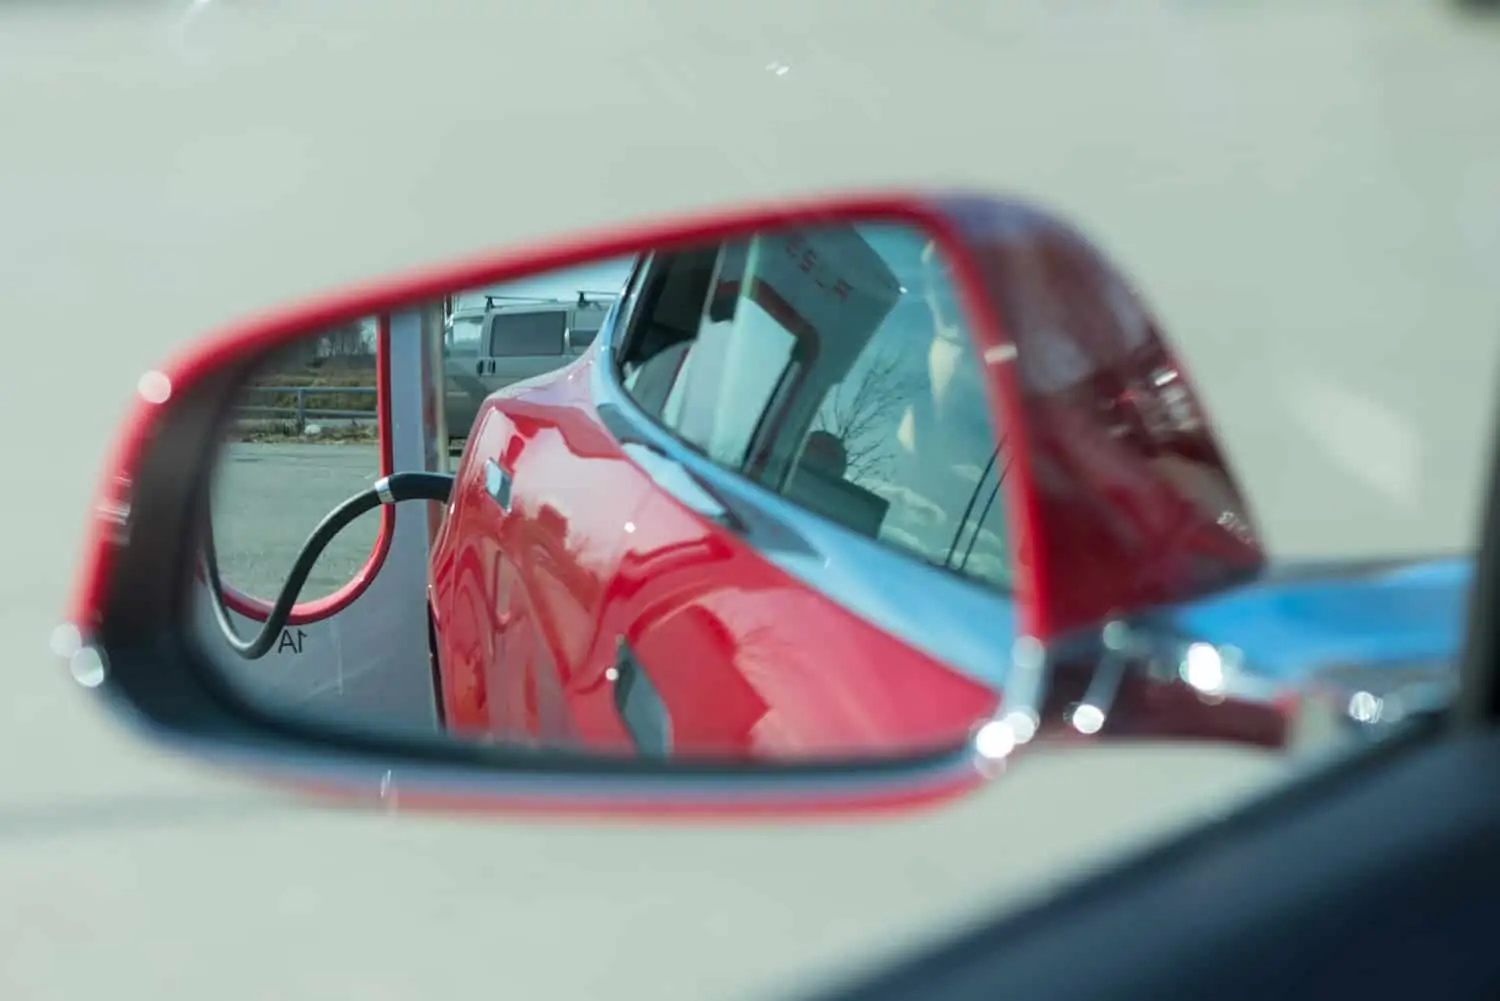 In the side rearview mirror of a red electric vehicle, there is a view of an attached EV charger.